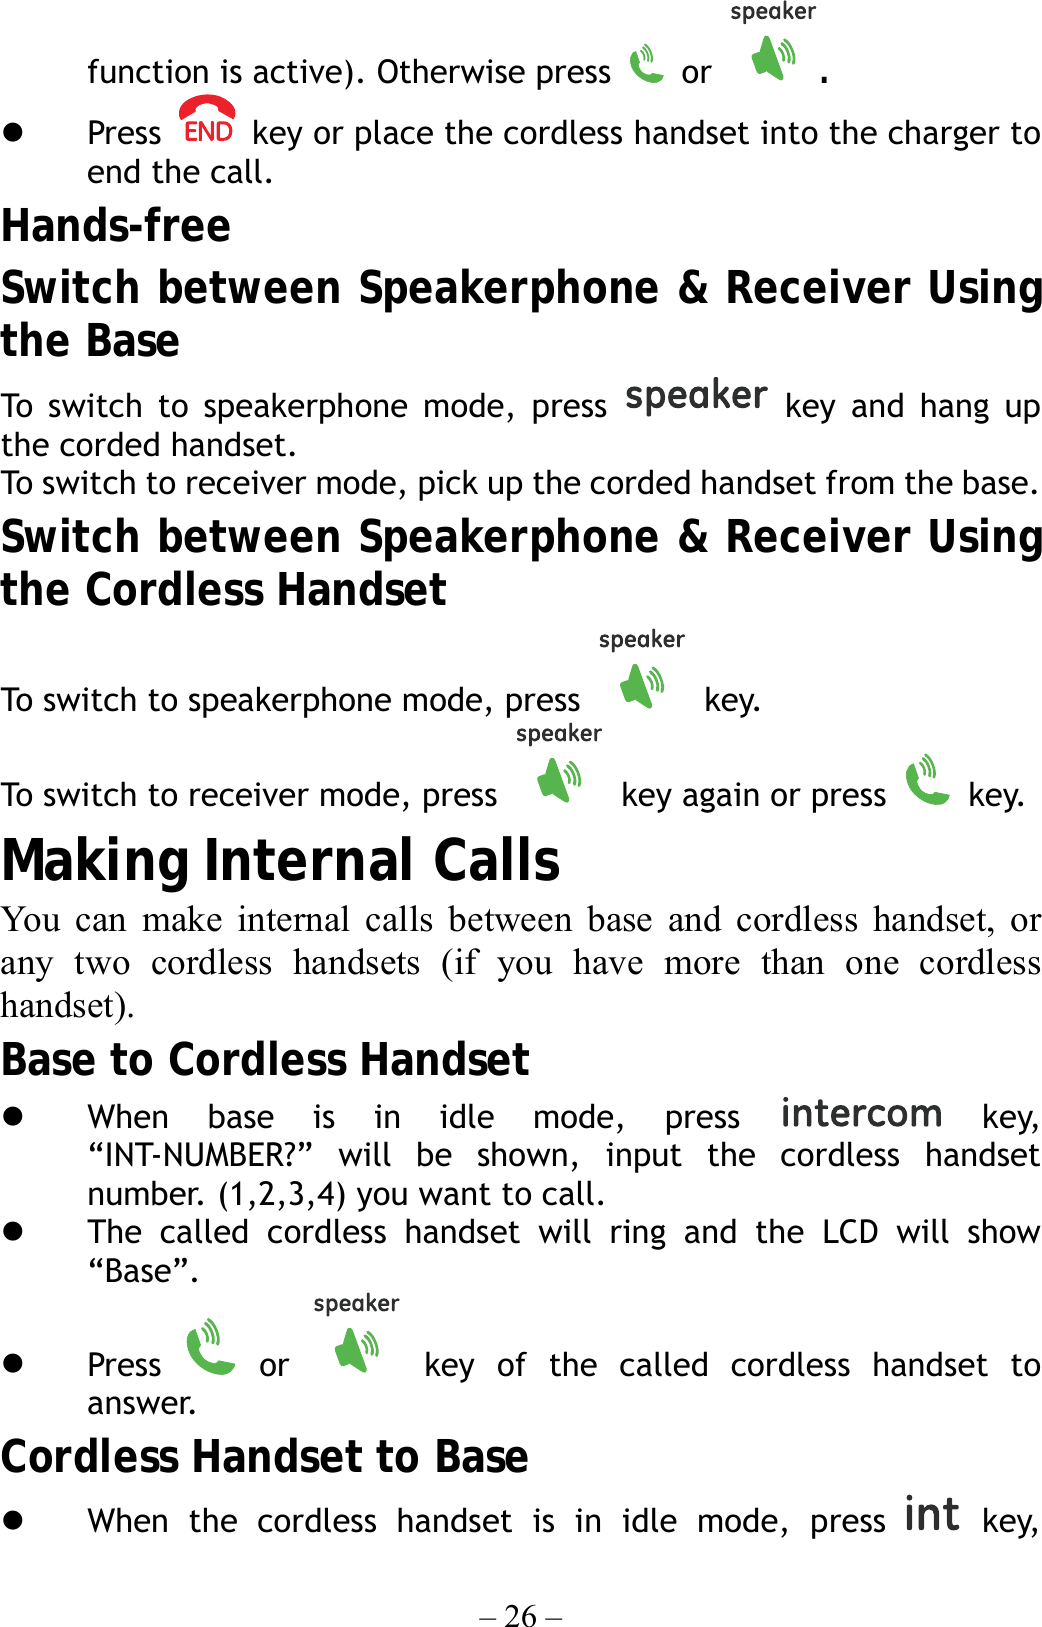 – 26 – function is active). Otherwise press   or  .   Press    key or place the cordless handset into the charger to end the call. Hands-free Switch between Speakerphone &amp; Receiver Using the Base To switch to speakerphone mode, press   key and hang up the corded handset. To swit ch to r ec eiver  mode, pick u p the corded handset from the base. Switch between Speakerphone &amp; Receiver Using the Cordless Handset To switch to speakerphone mode, press   key. To switch to receiver mode, press    key again or press   key. Making Internal Calls You can make internal calls between base and cordless handset, or any two cordless handsets (if you have more than one cordless handset). Base to Cordless Handset   When base is in idle mode, press   key, “INT-NUMBER?” will be shown, input the cordless handset number. (1,2,3,4) you want to call.   The called cordless handset will ring and the LCD will show “Base”.   Press   or   key of the called cordless handset to answer. Cordless Handset to Base   When the cordless handset is in idle mode, press   key, 